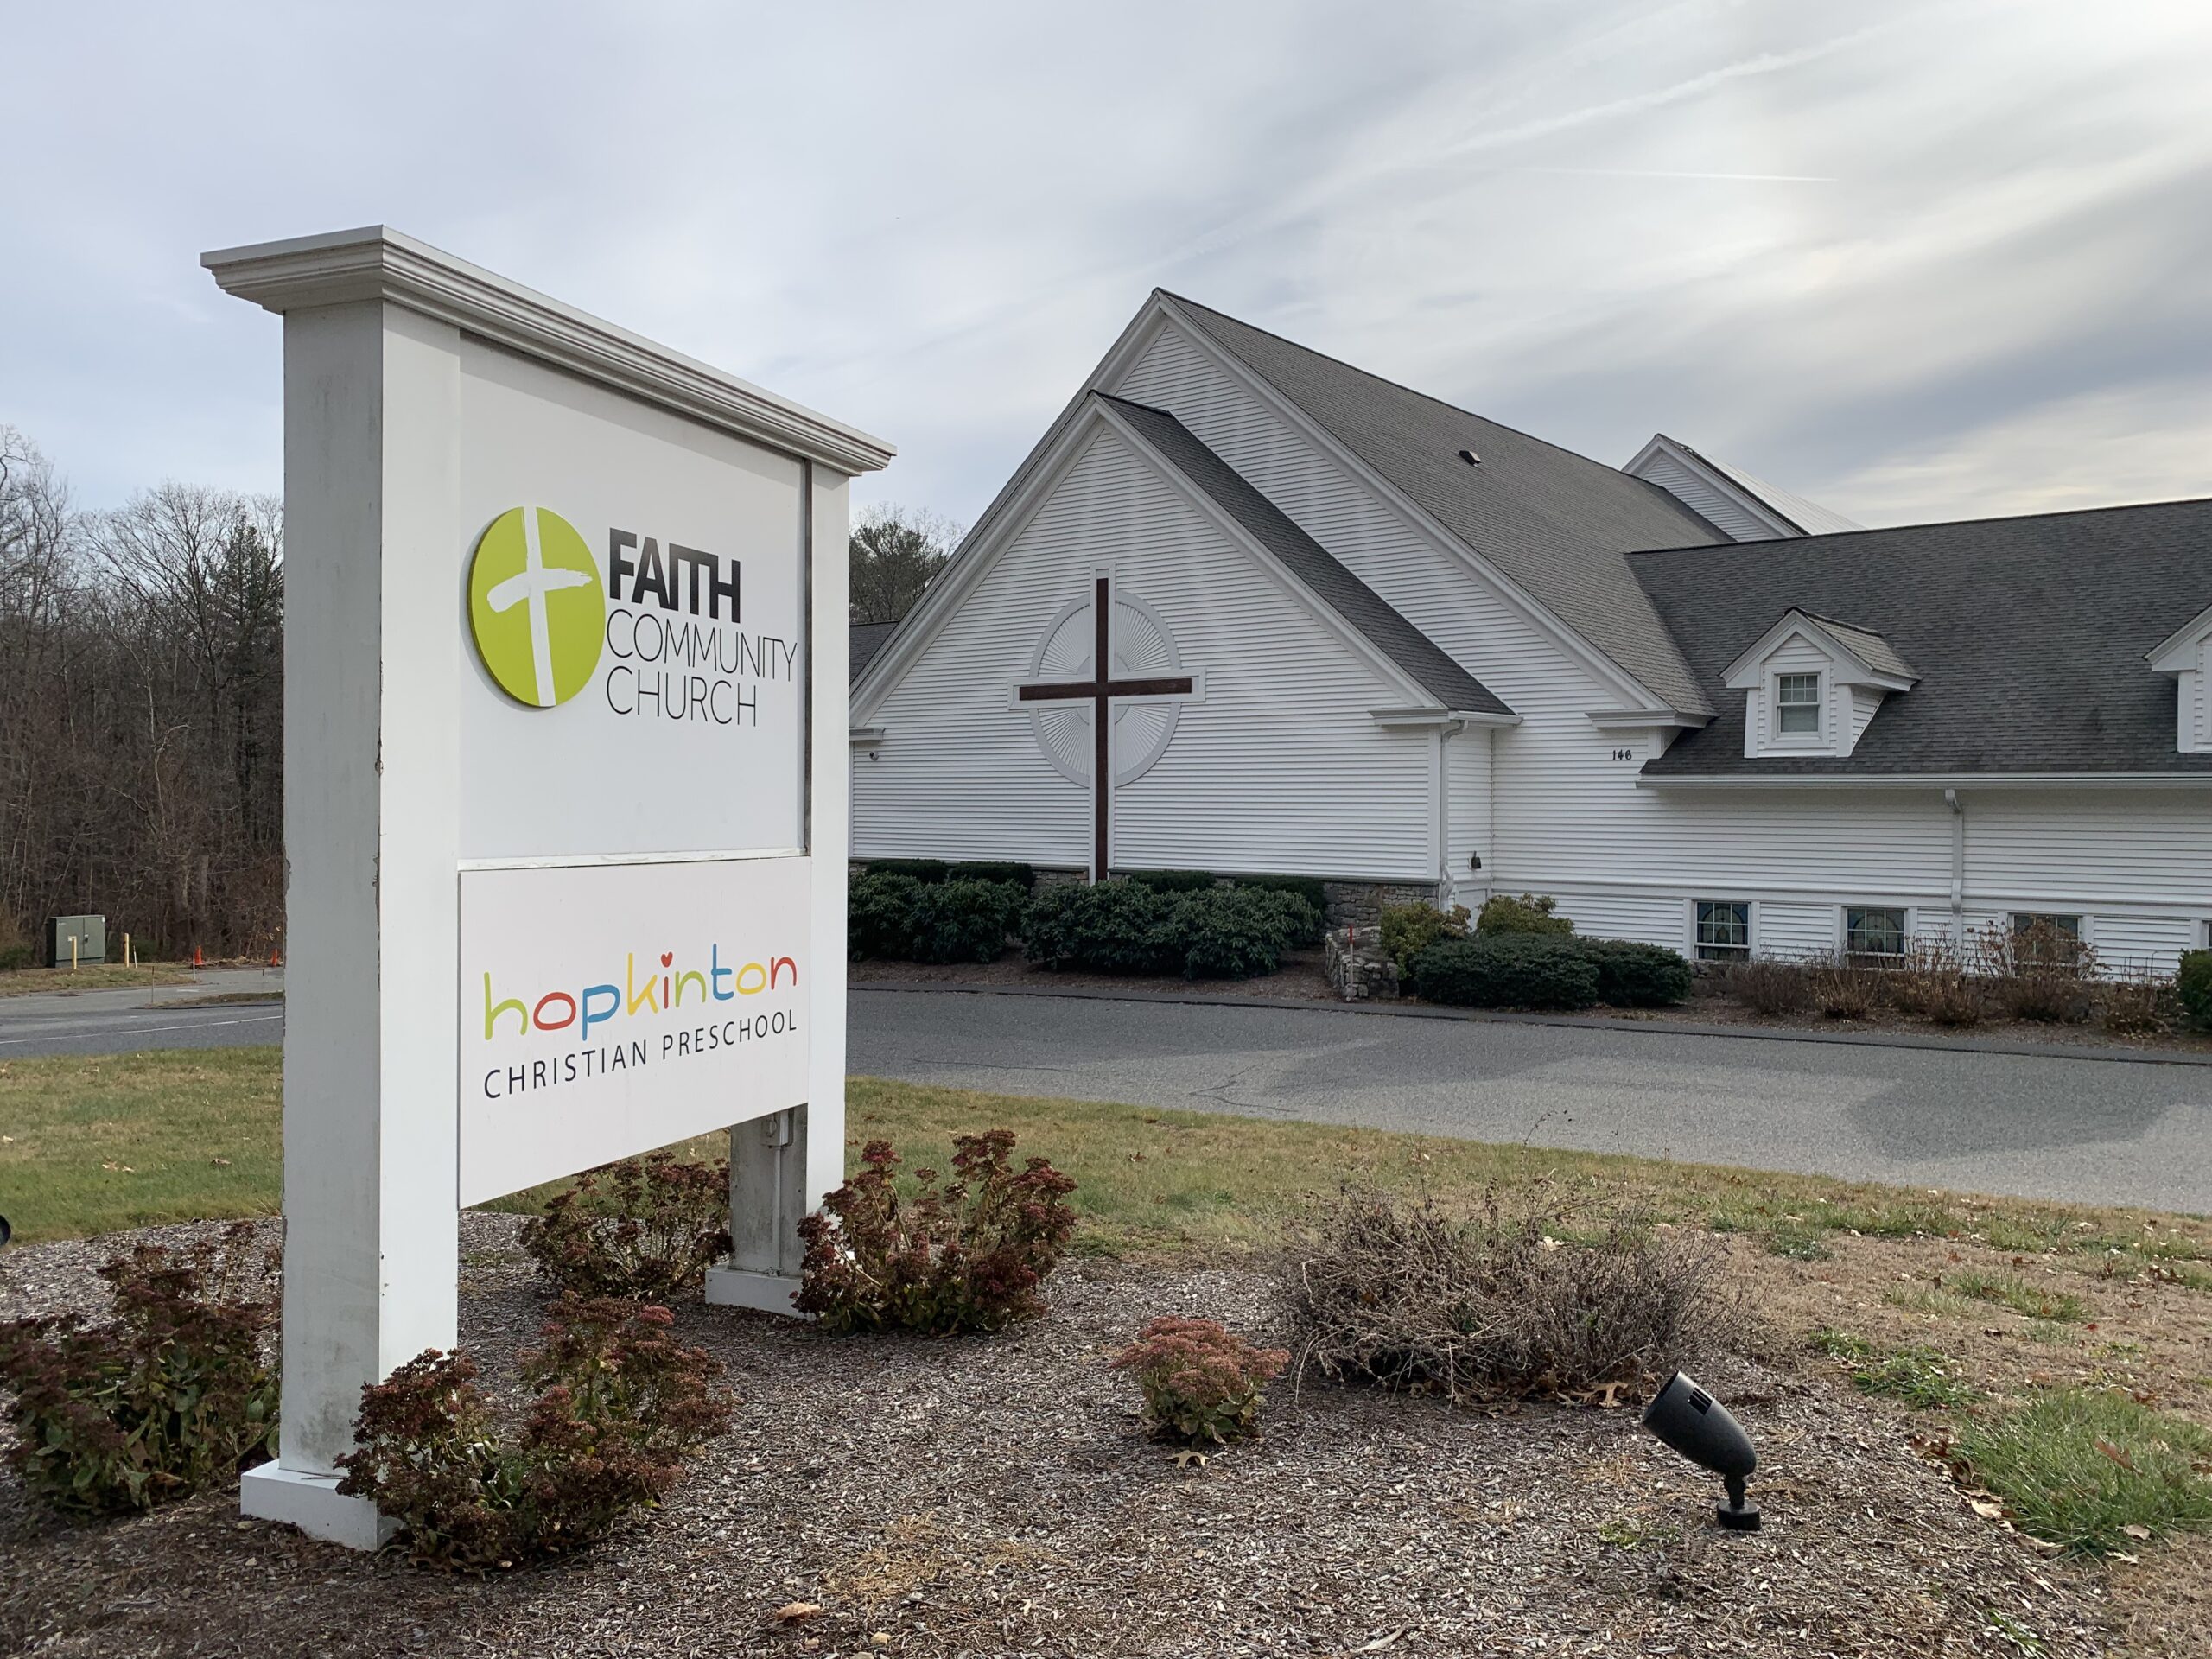 Faith Community Church invests, improves, inspires